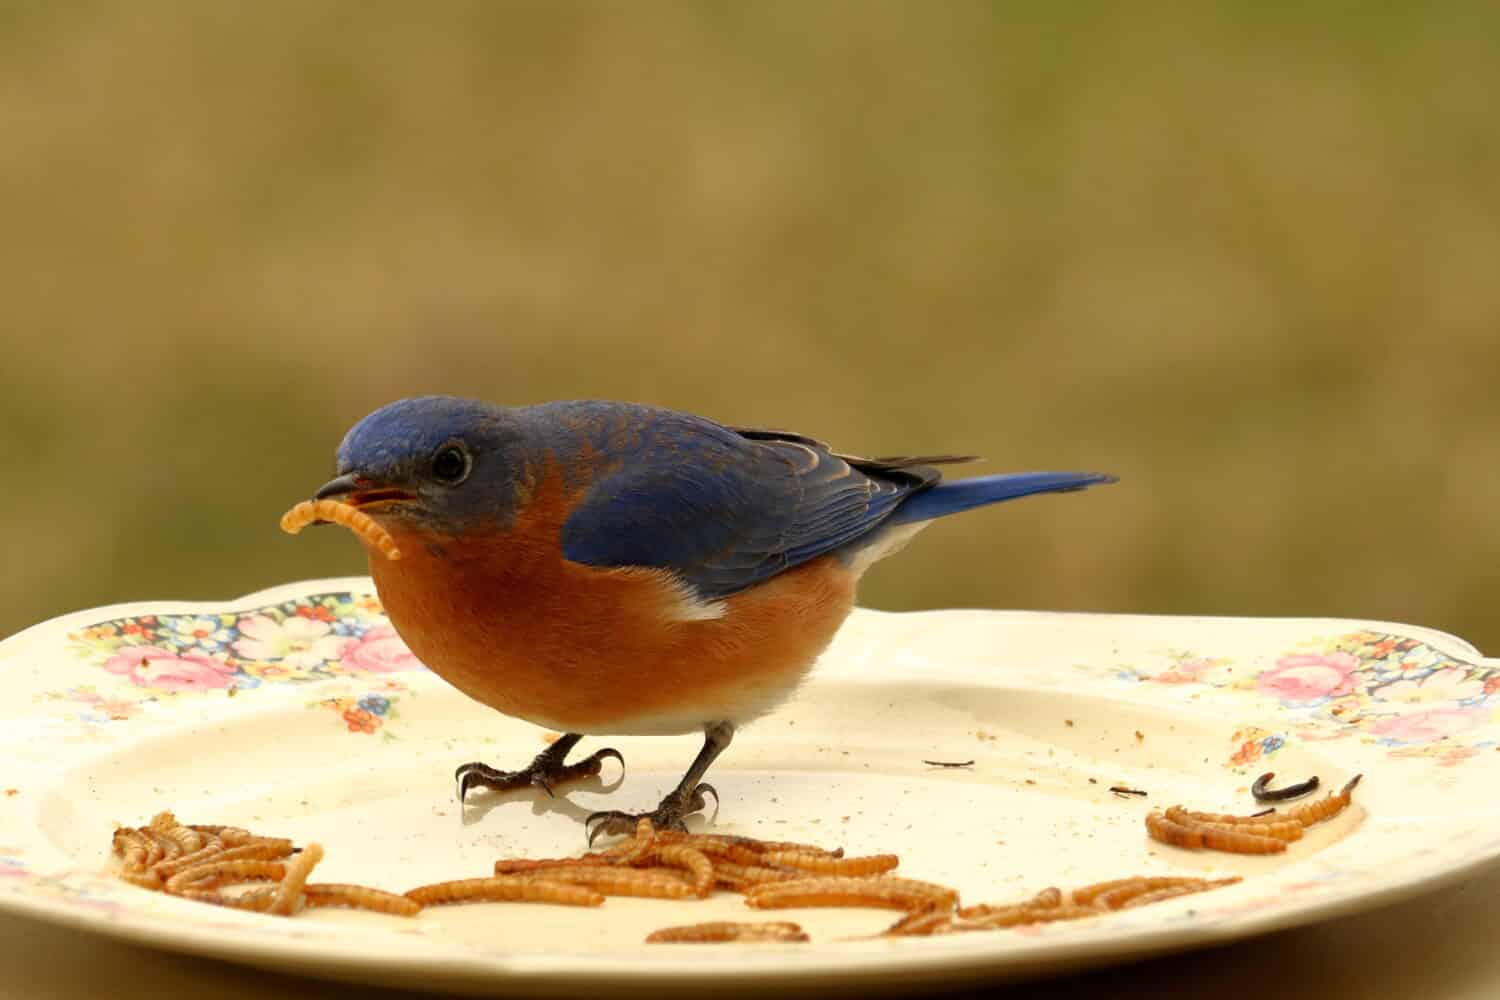 Male Eastern Bluebird eating a mealworm on a china plate bird feeder.